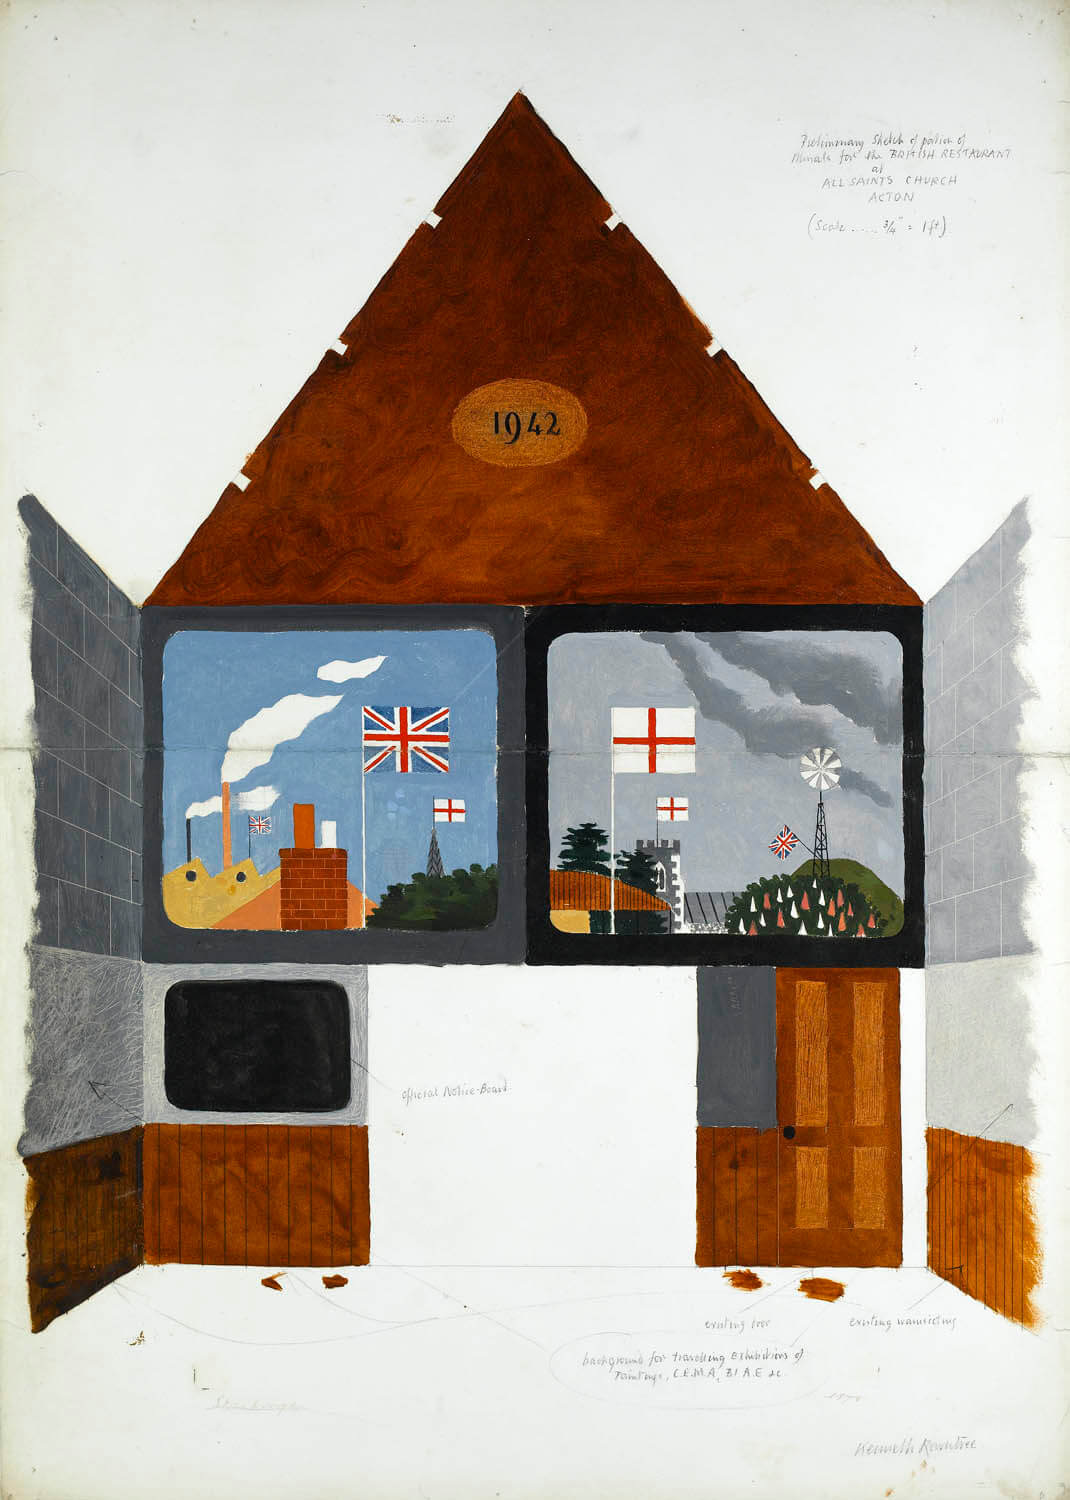 Kenneth Rowntree - The British Restaurant at Acton